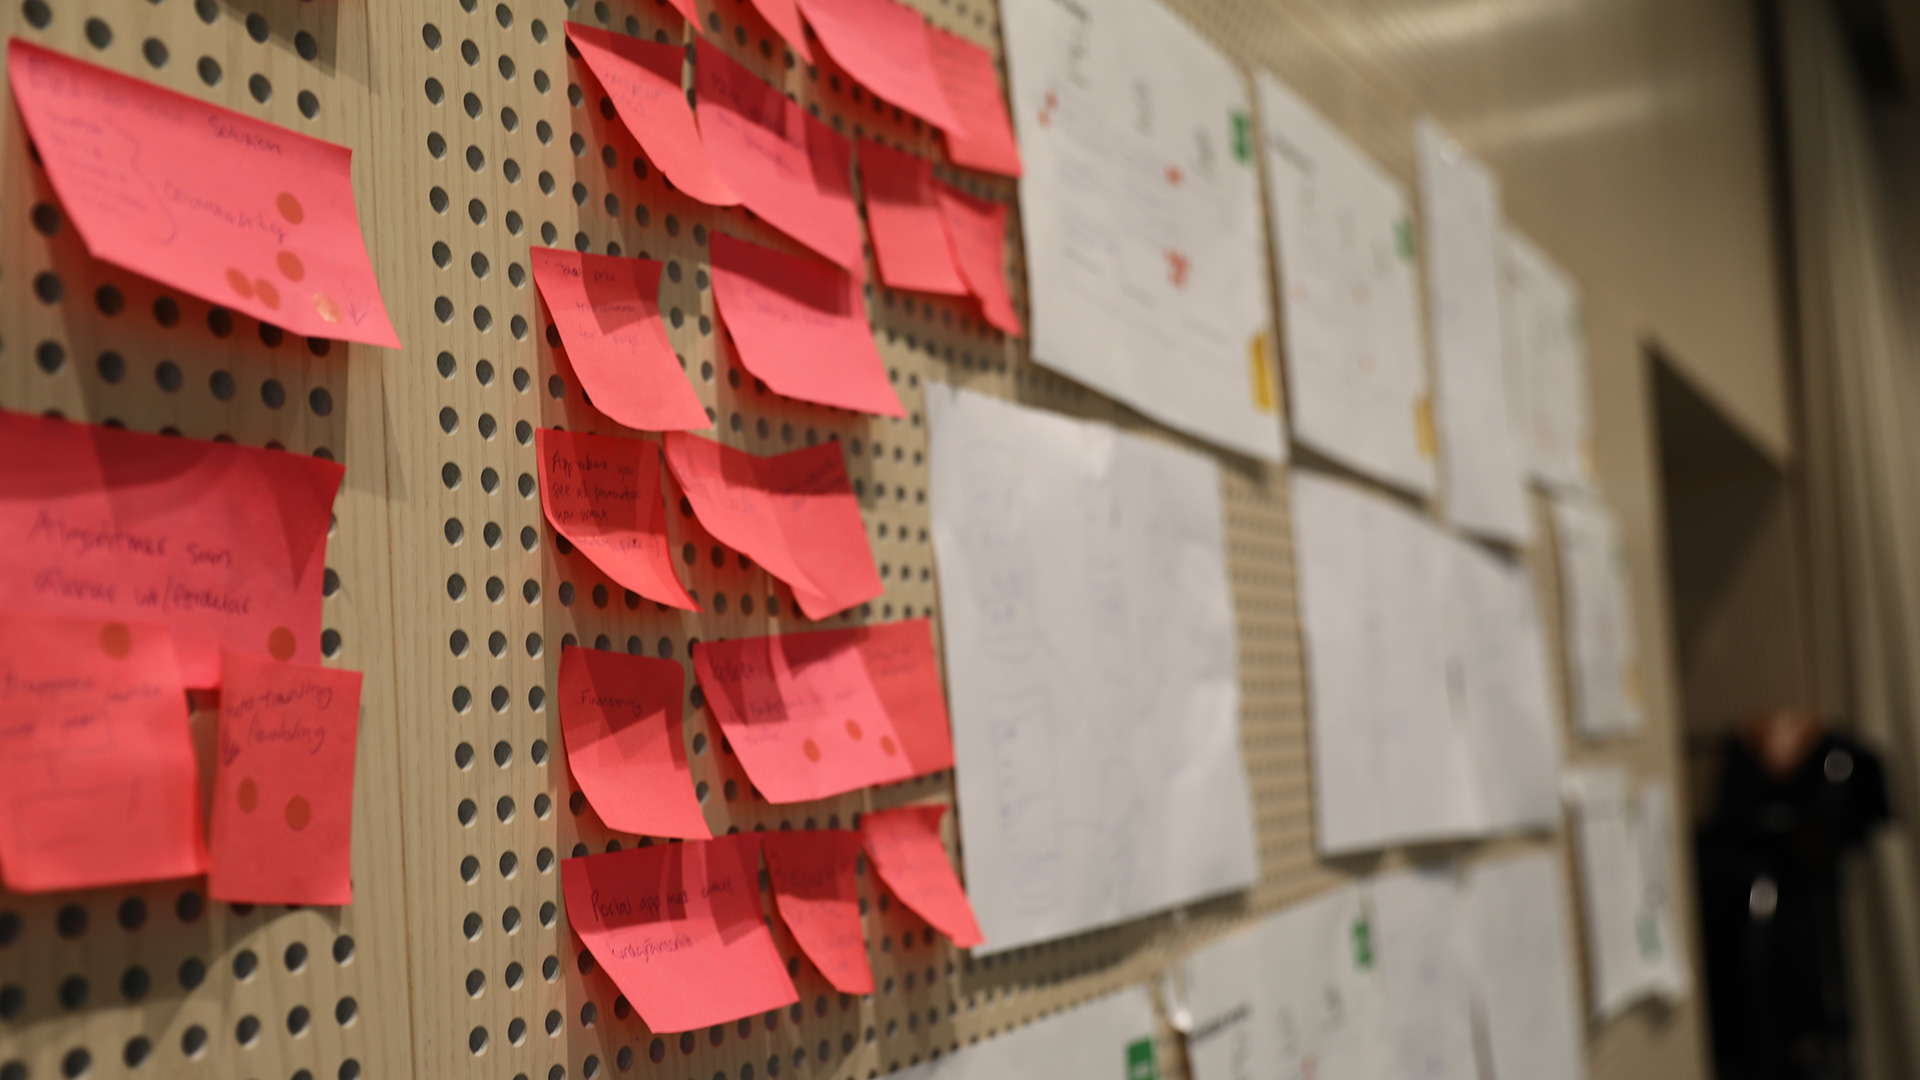 Many ideas in the form of post-it notes on a bulletin board.